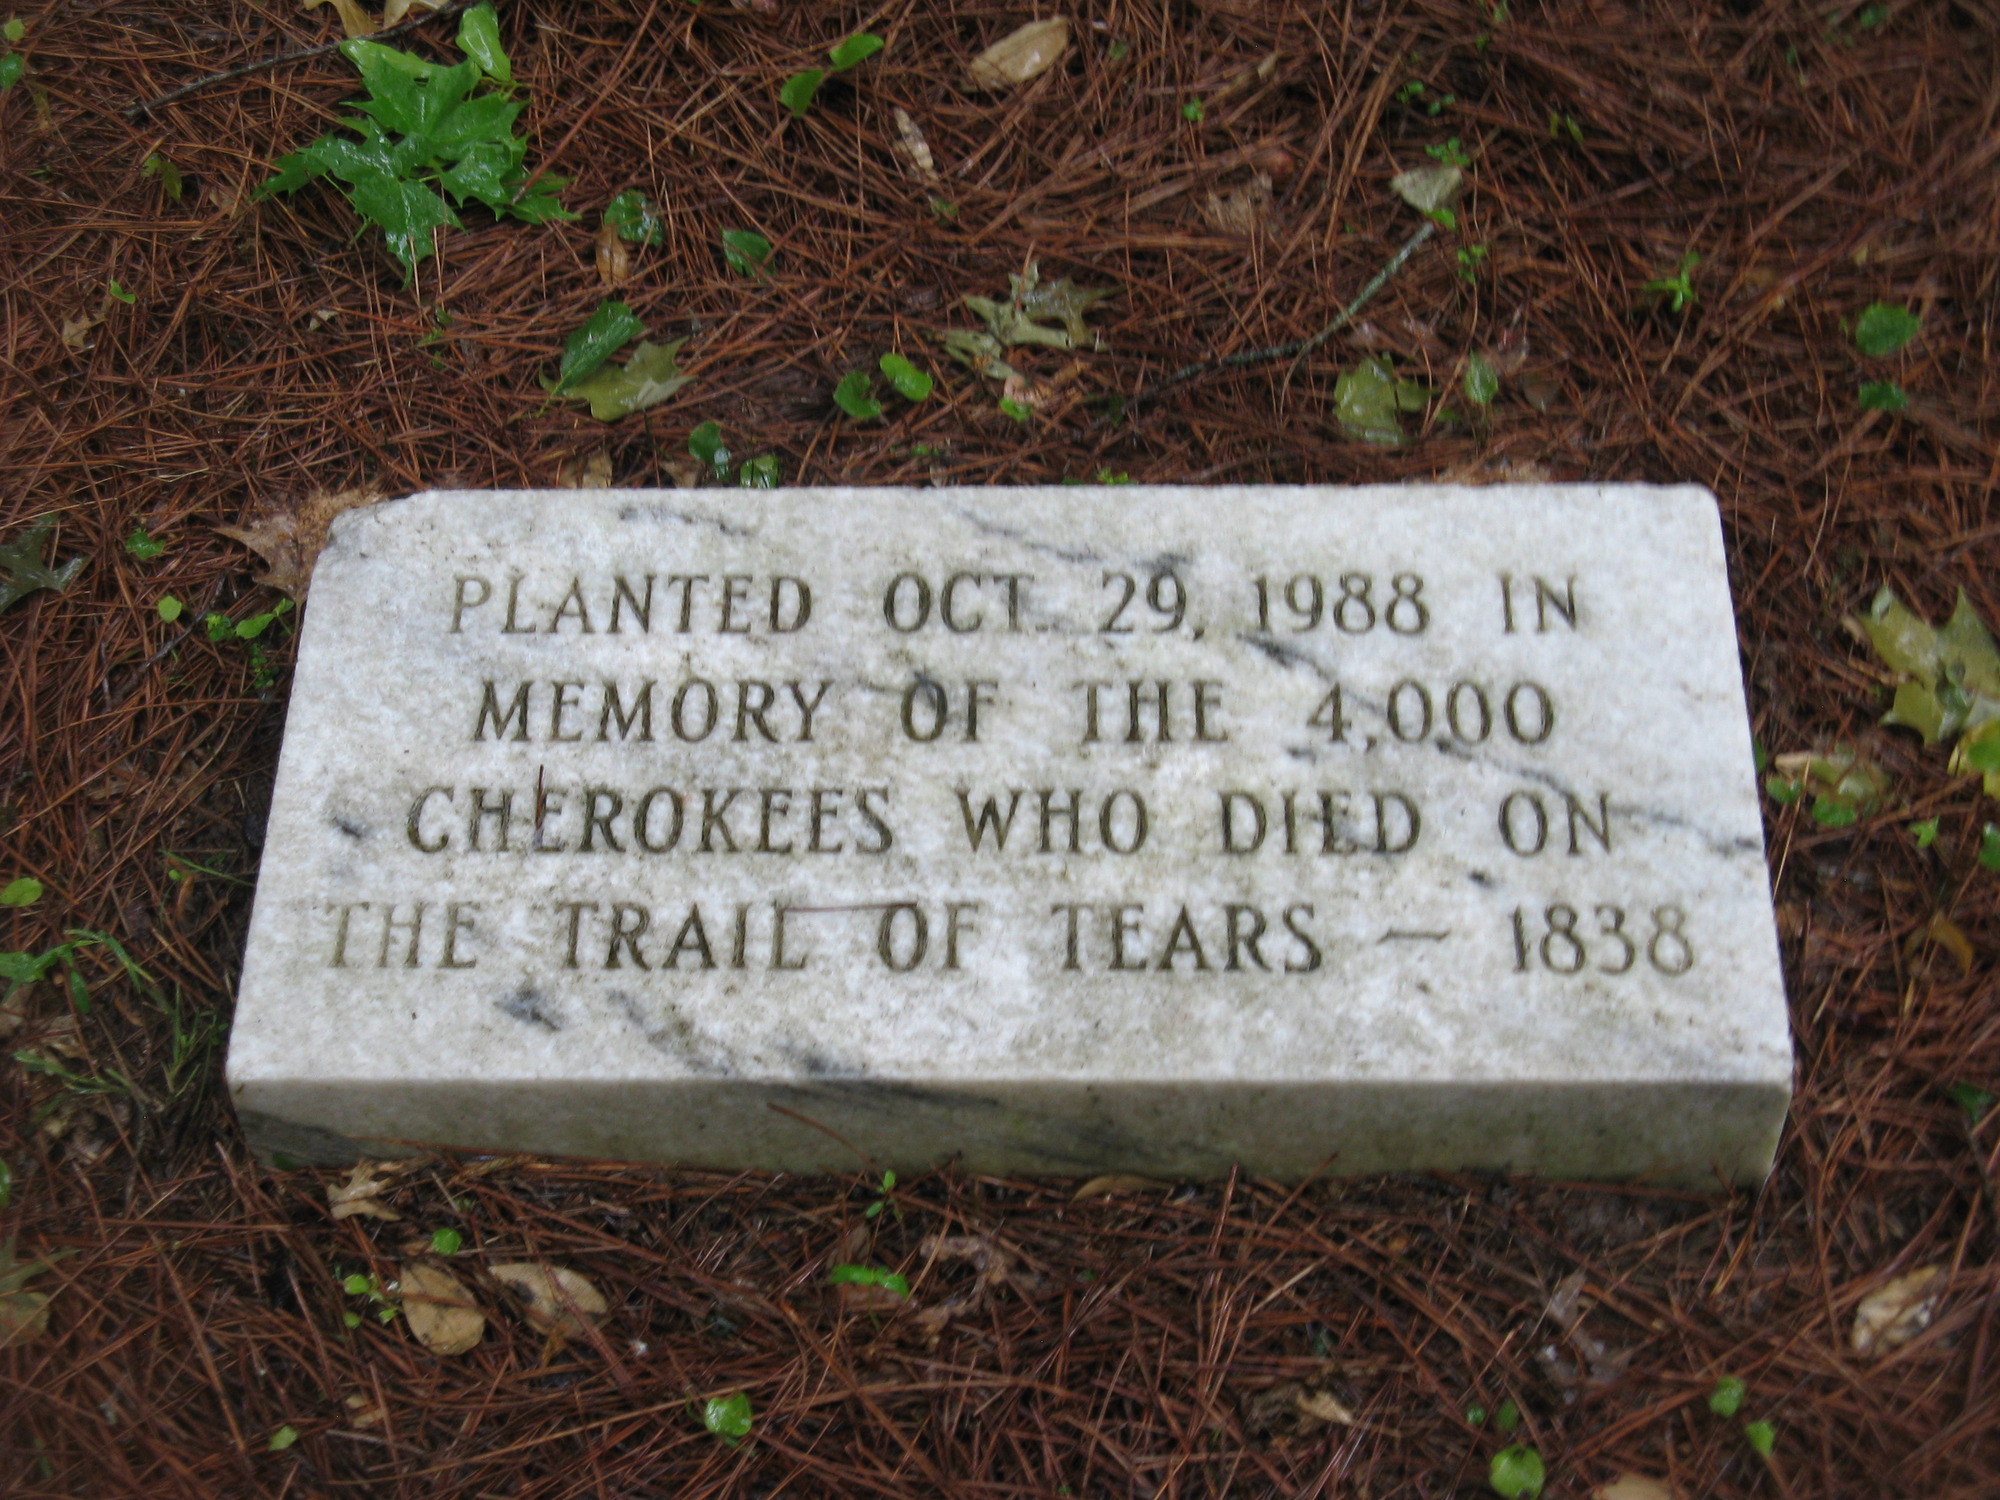 A marker in memory of the 4,000 Cherokees who died on the Trail of Tears